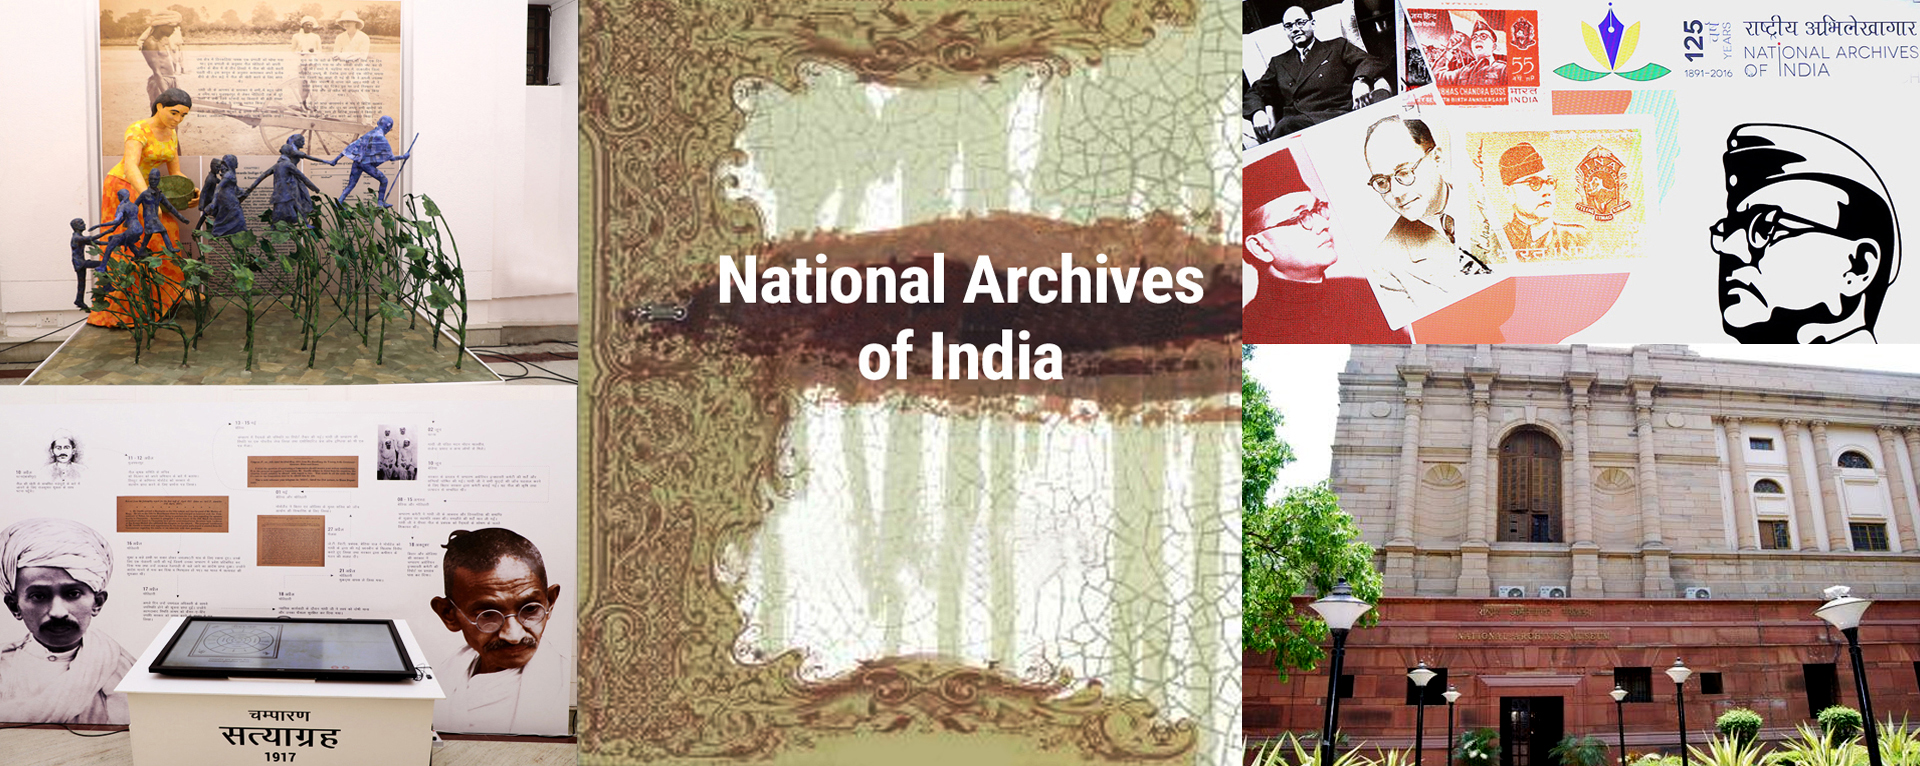 Official website of National Archives of India, Government of India